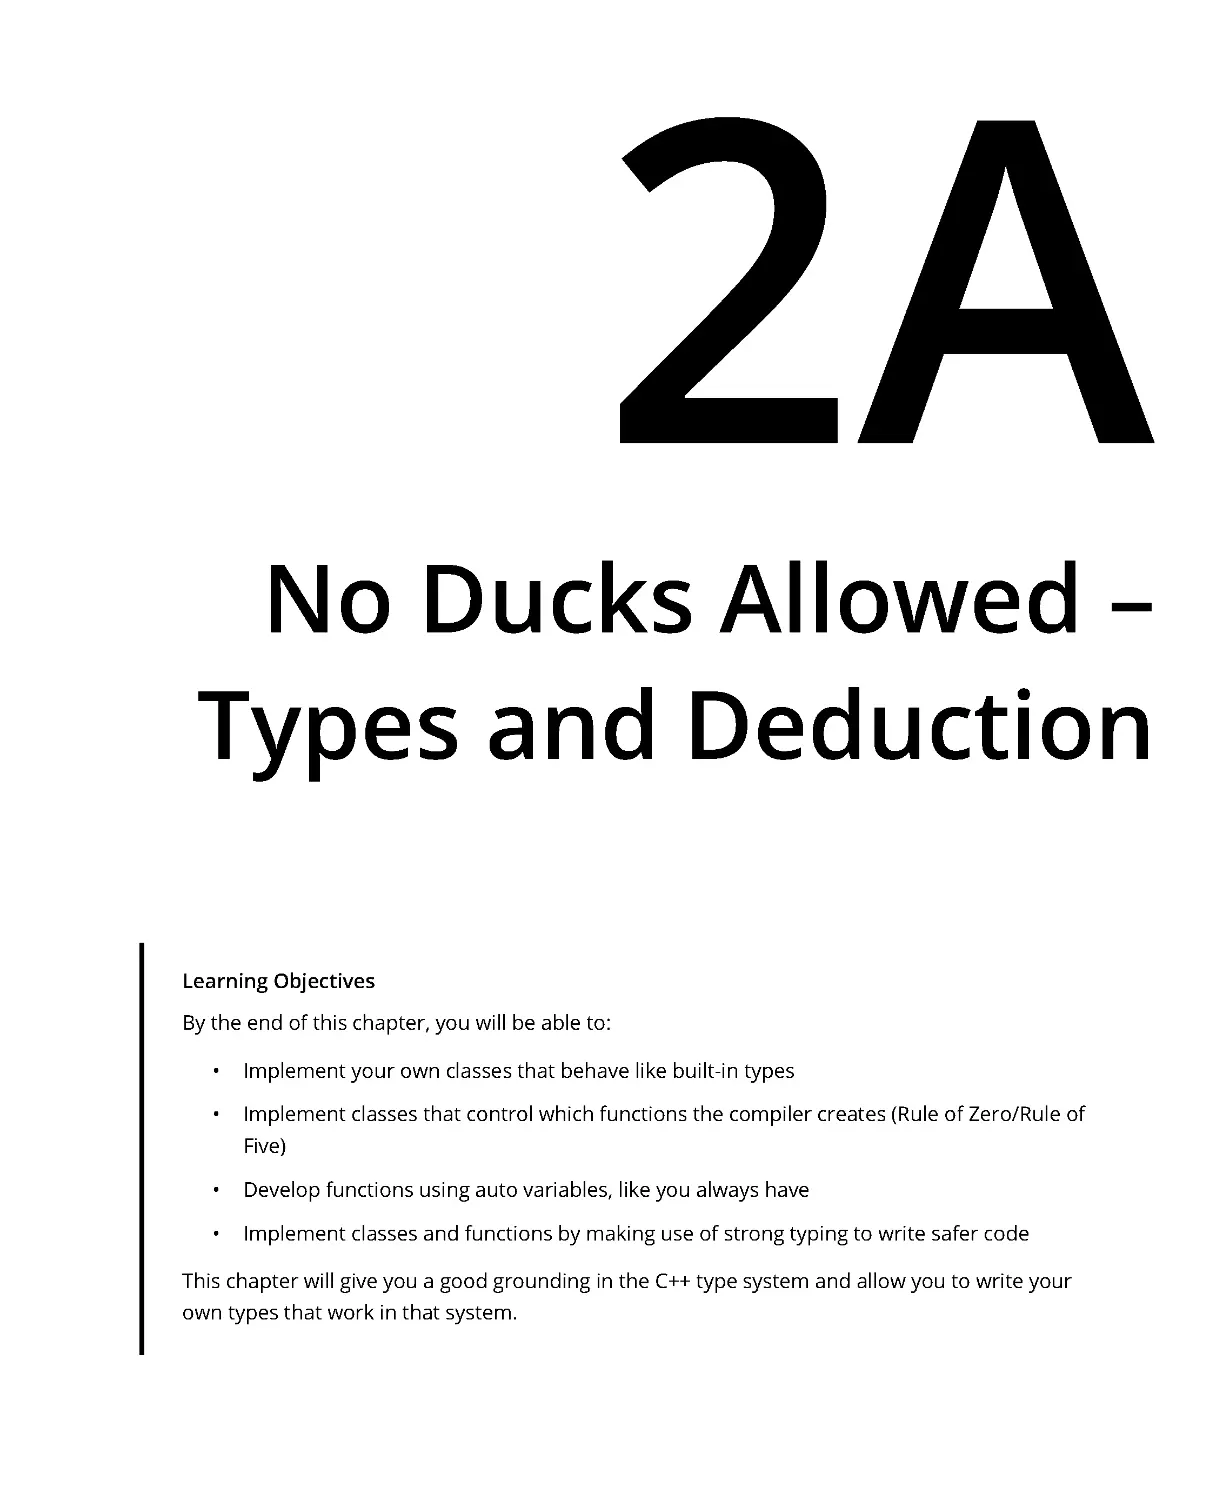 Chapter 2A: No Ducks Allowed – Types and Deduction